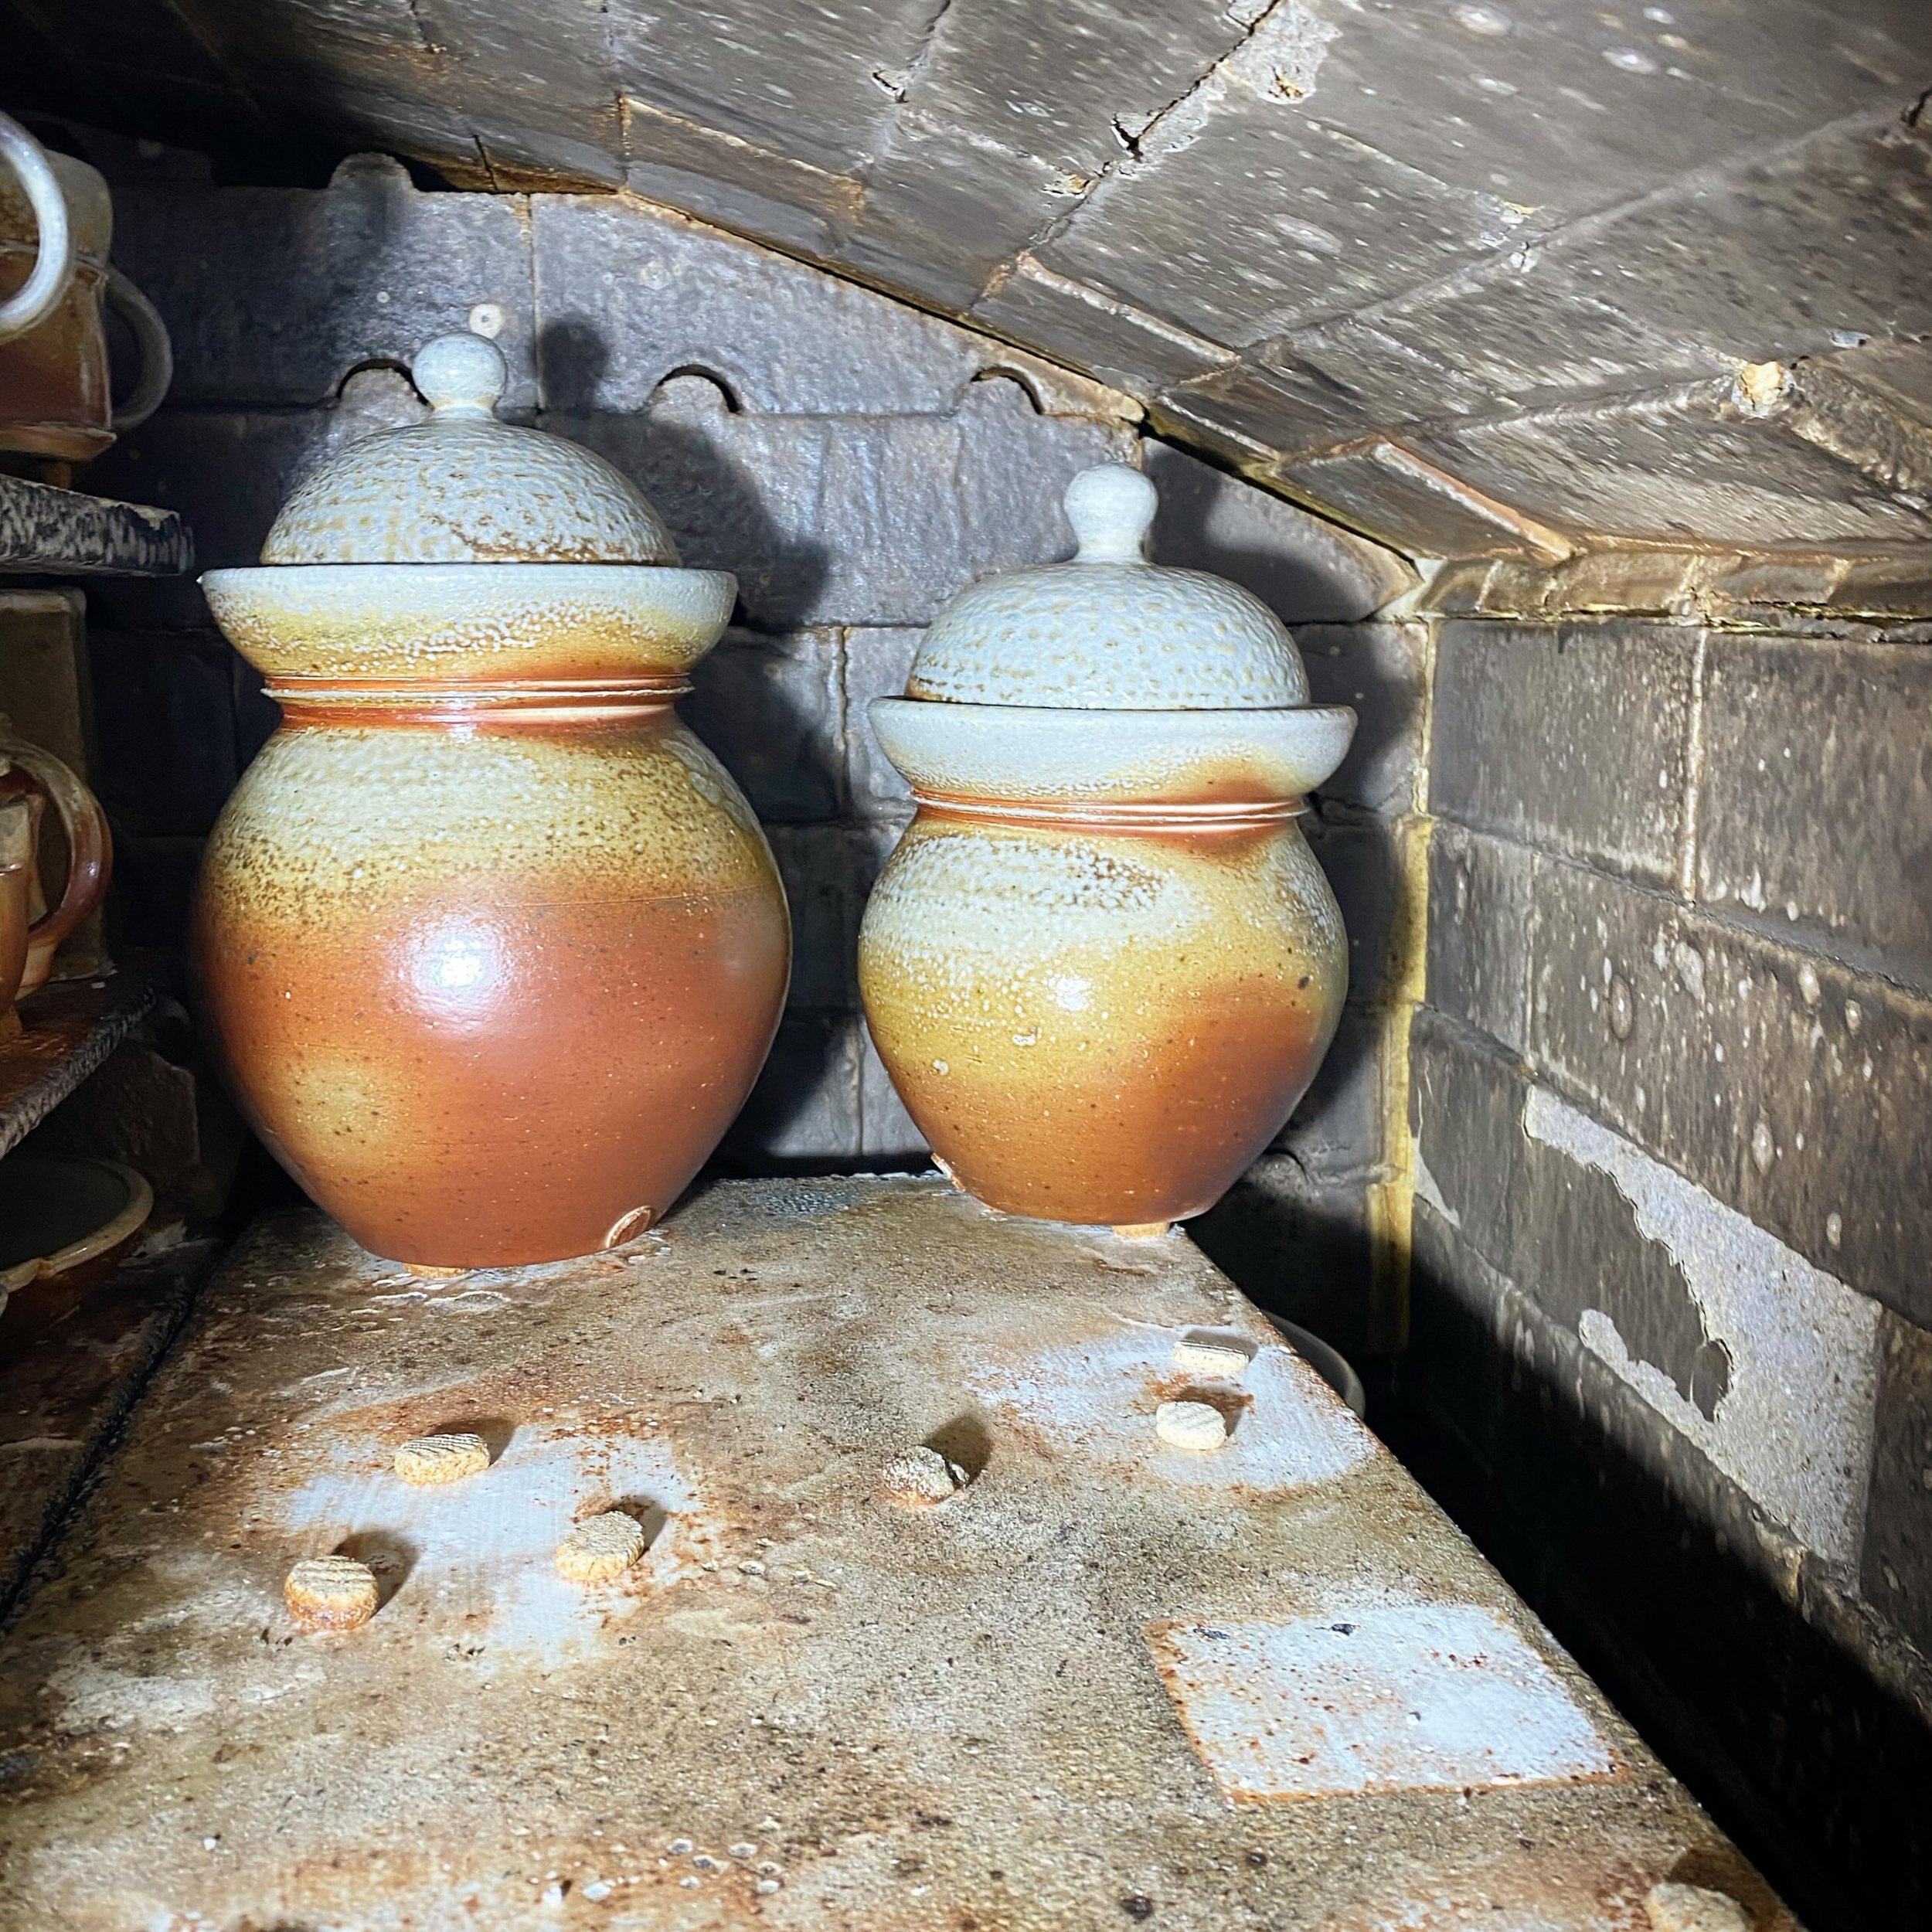 Sneak peak from the unload today! Lots of lovely pots came out. These two fermenting jars of mine were right in the back corner in the top of the soda chamber of Pepino.